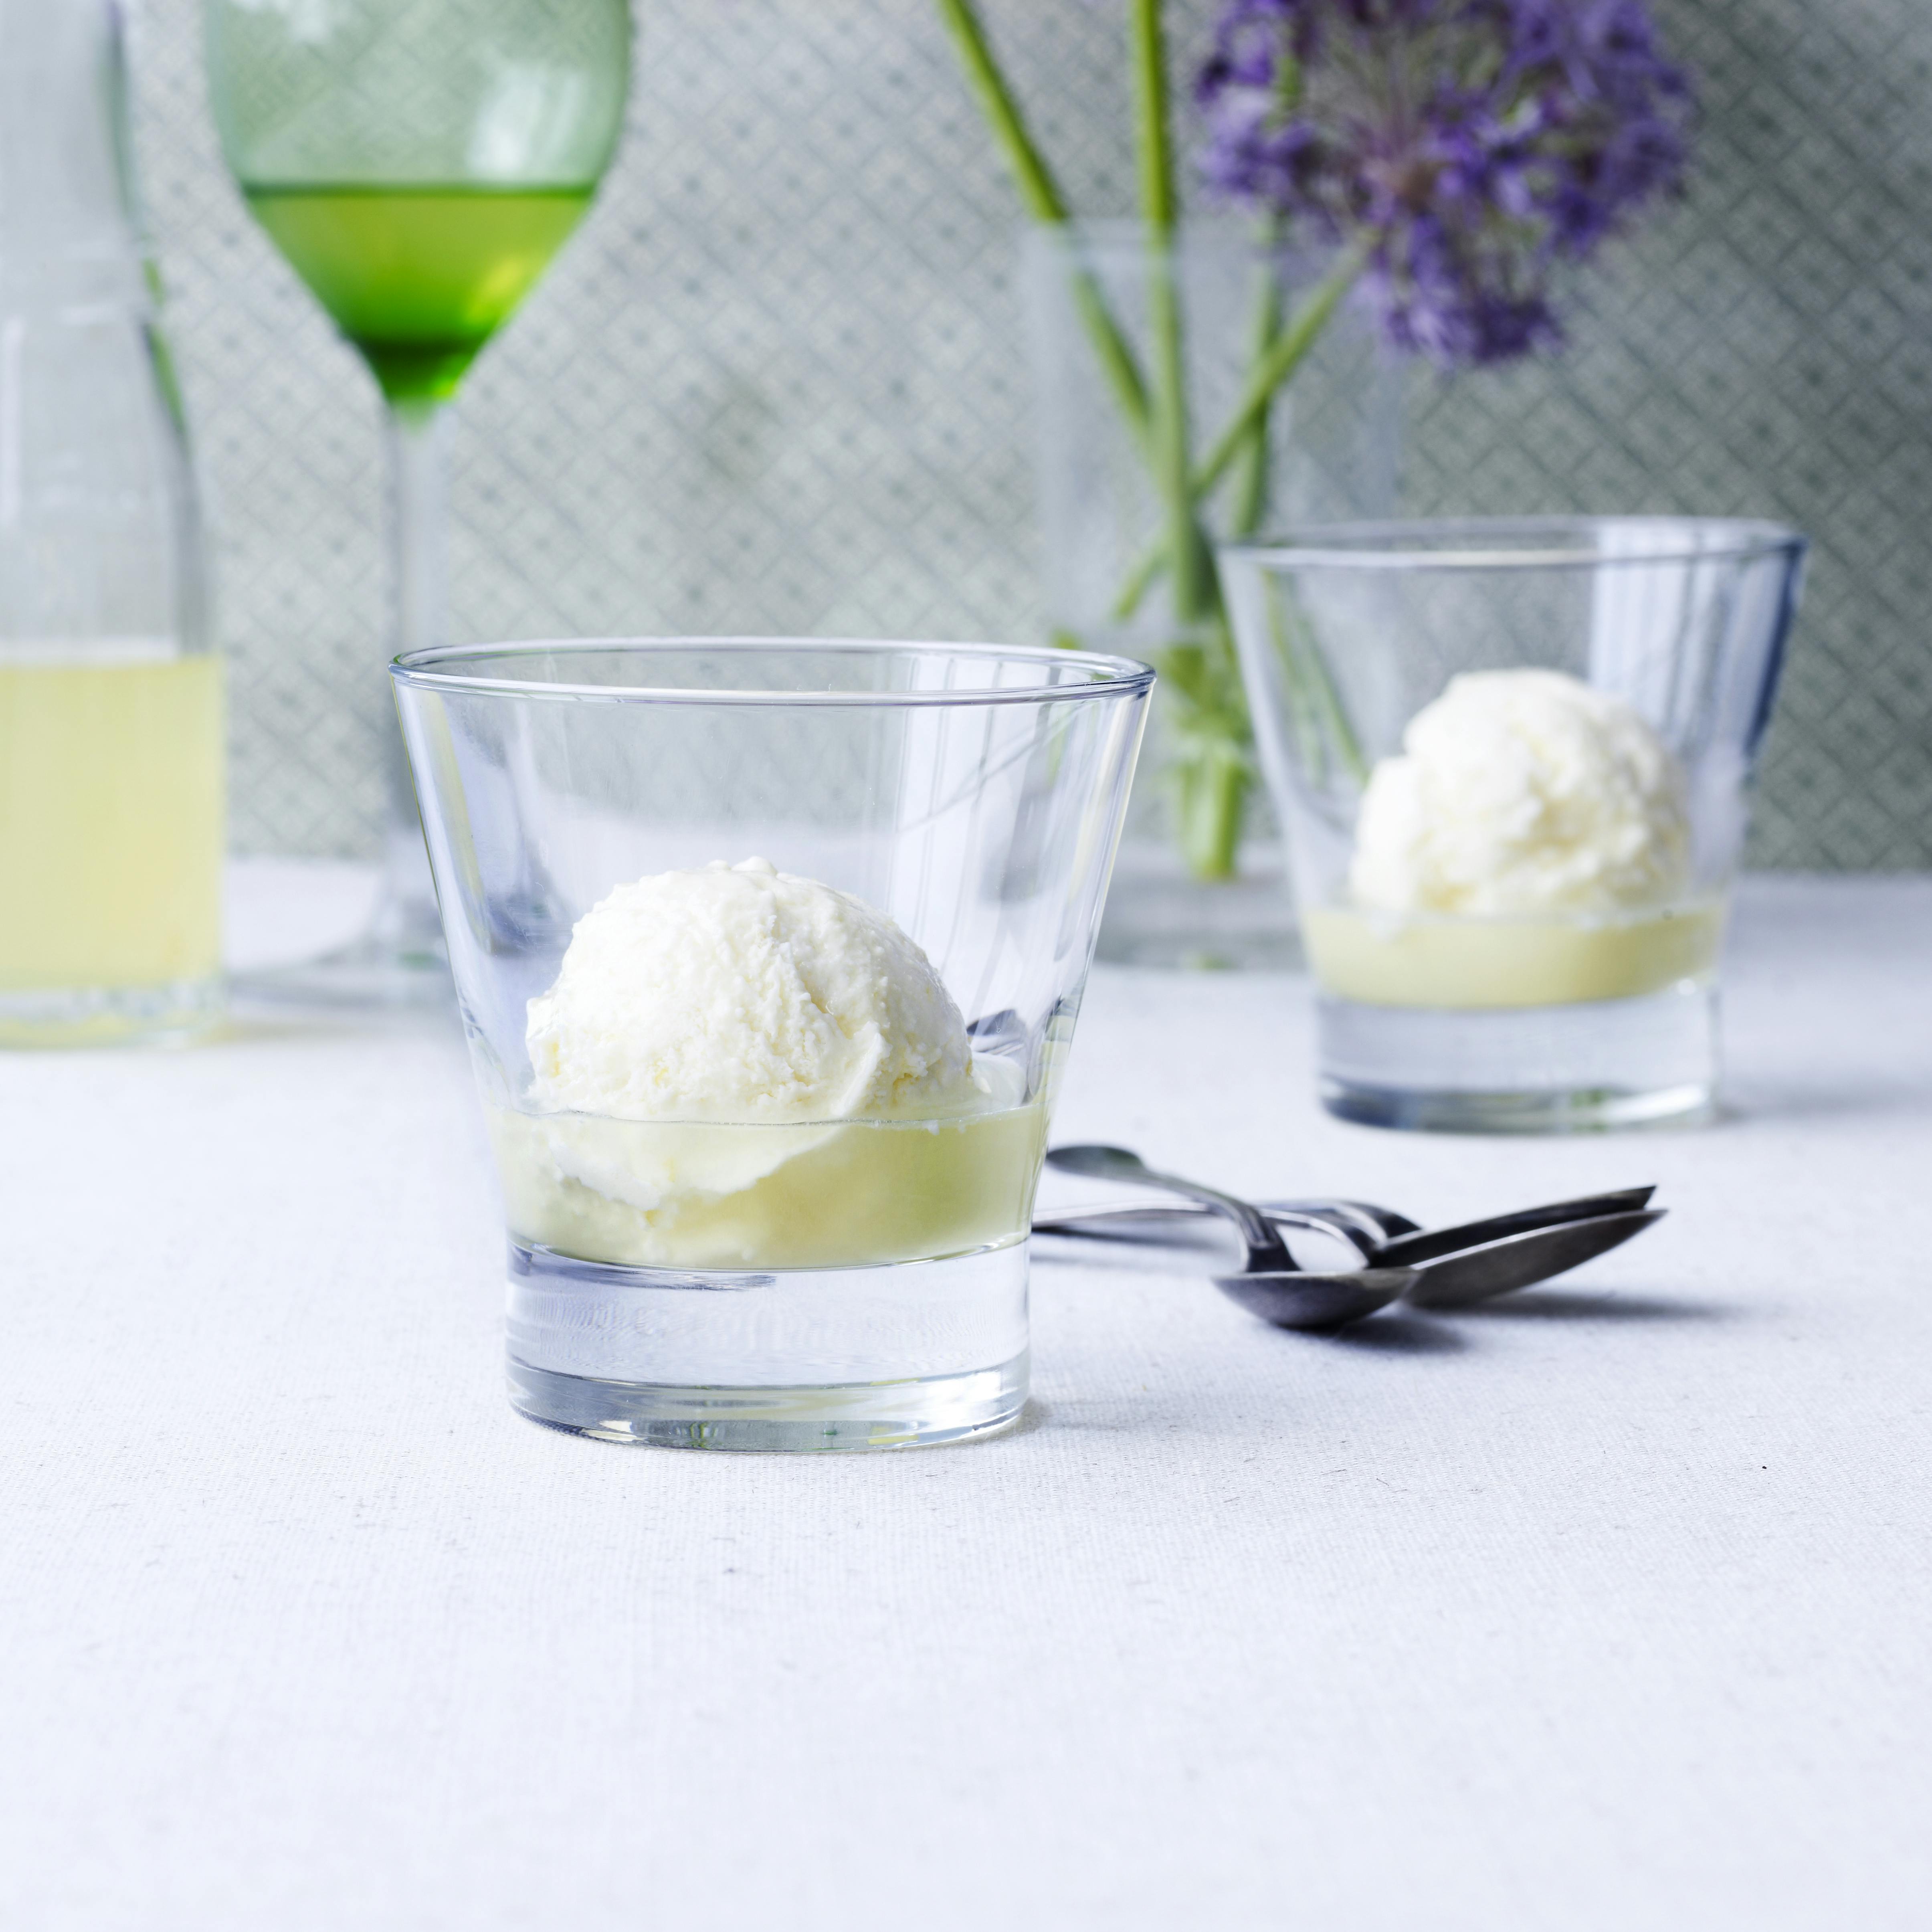 Citronis med limoncello